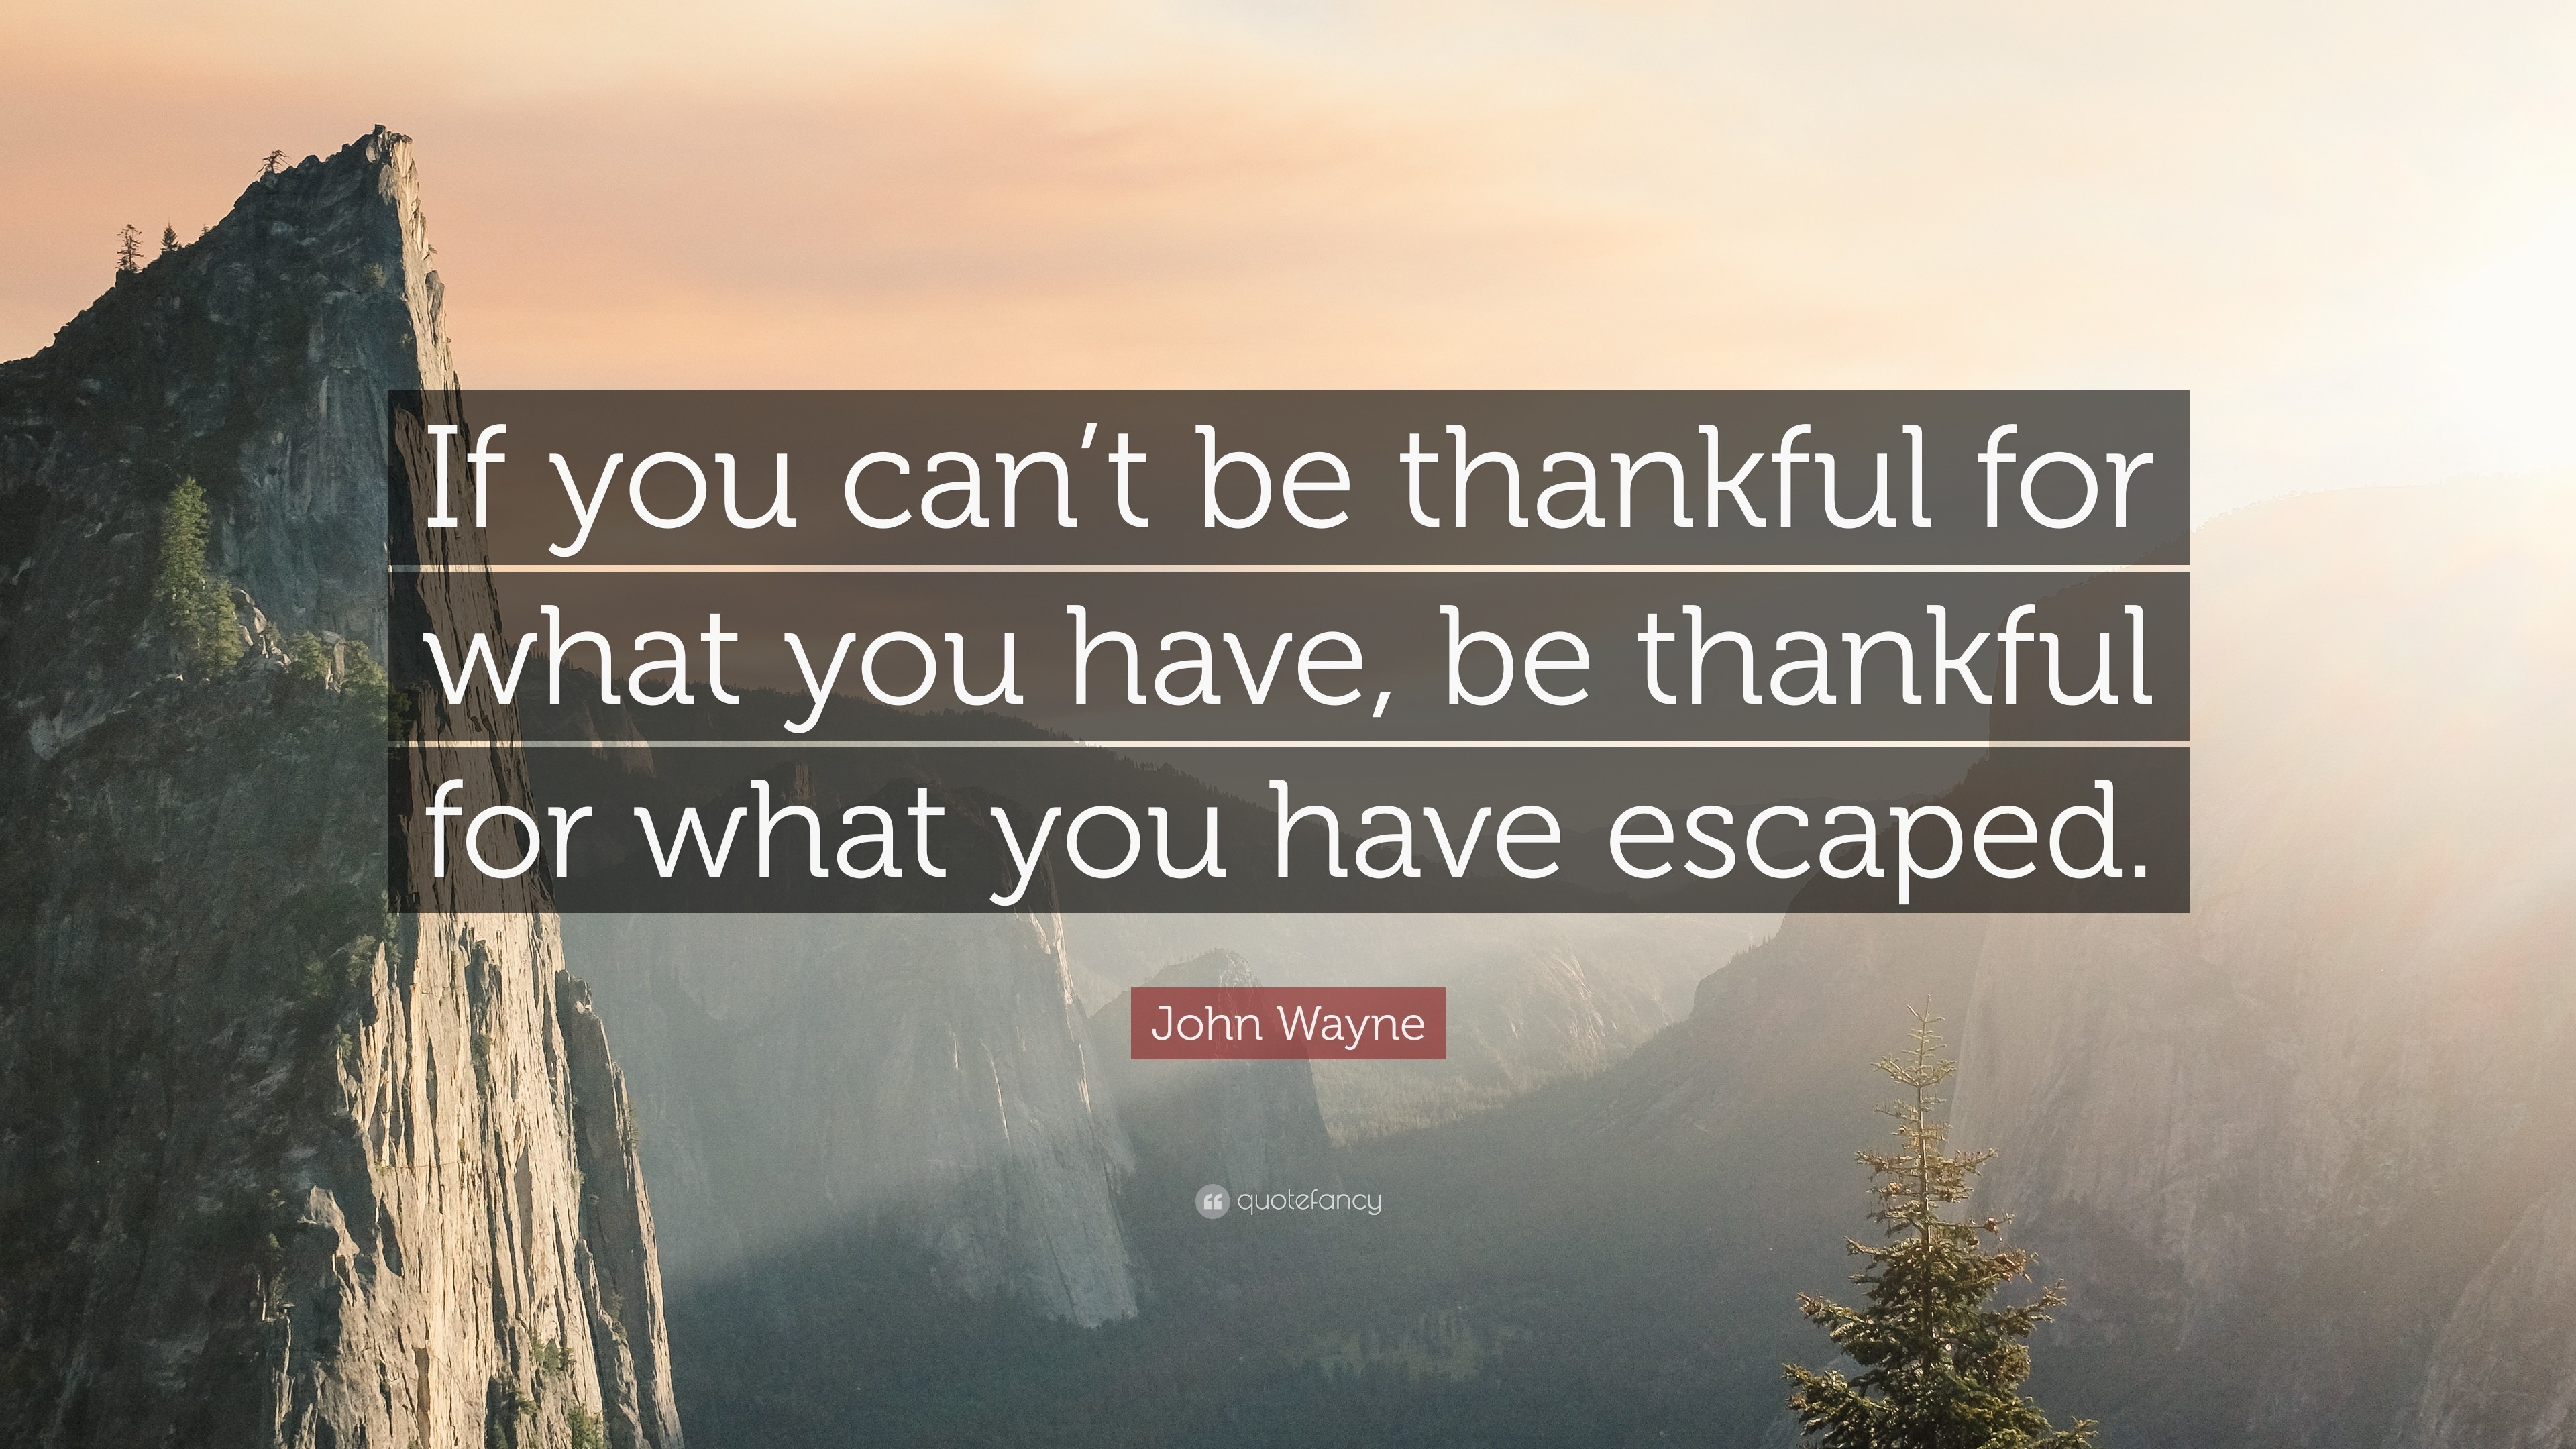 3840x2160 John Wayne Quote: “If you can't be thankful for what you have